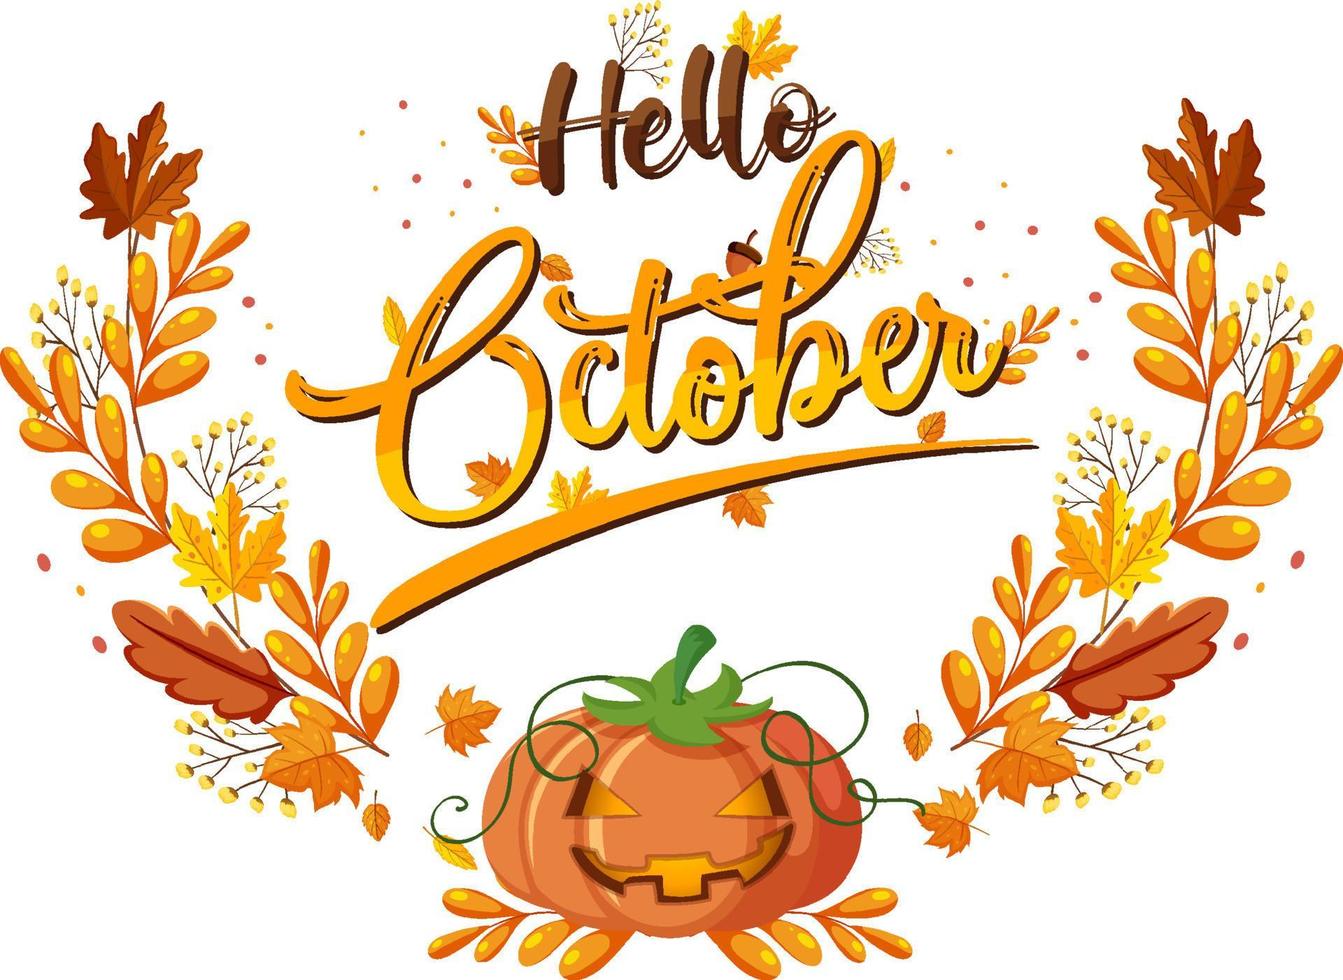 Hello October with ornate of autumn leaves vector